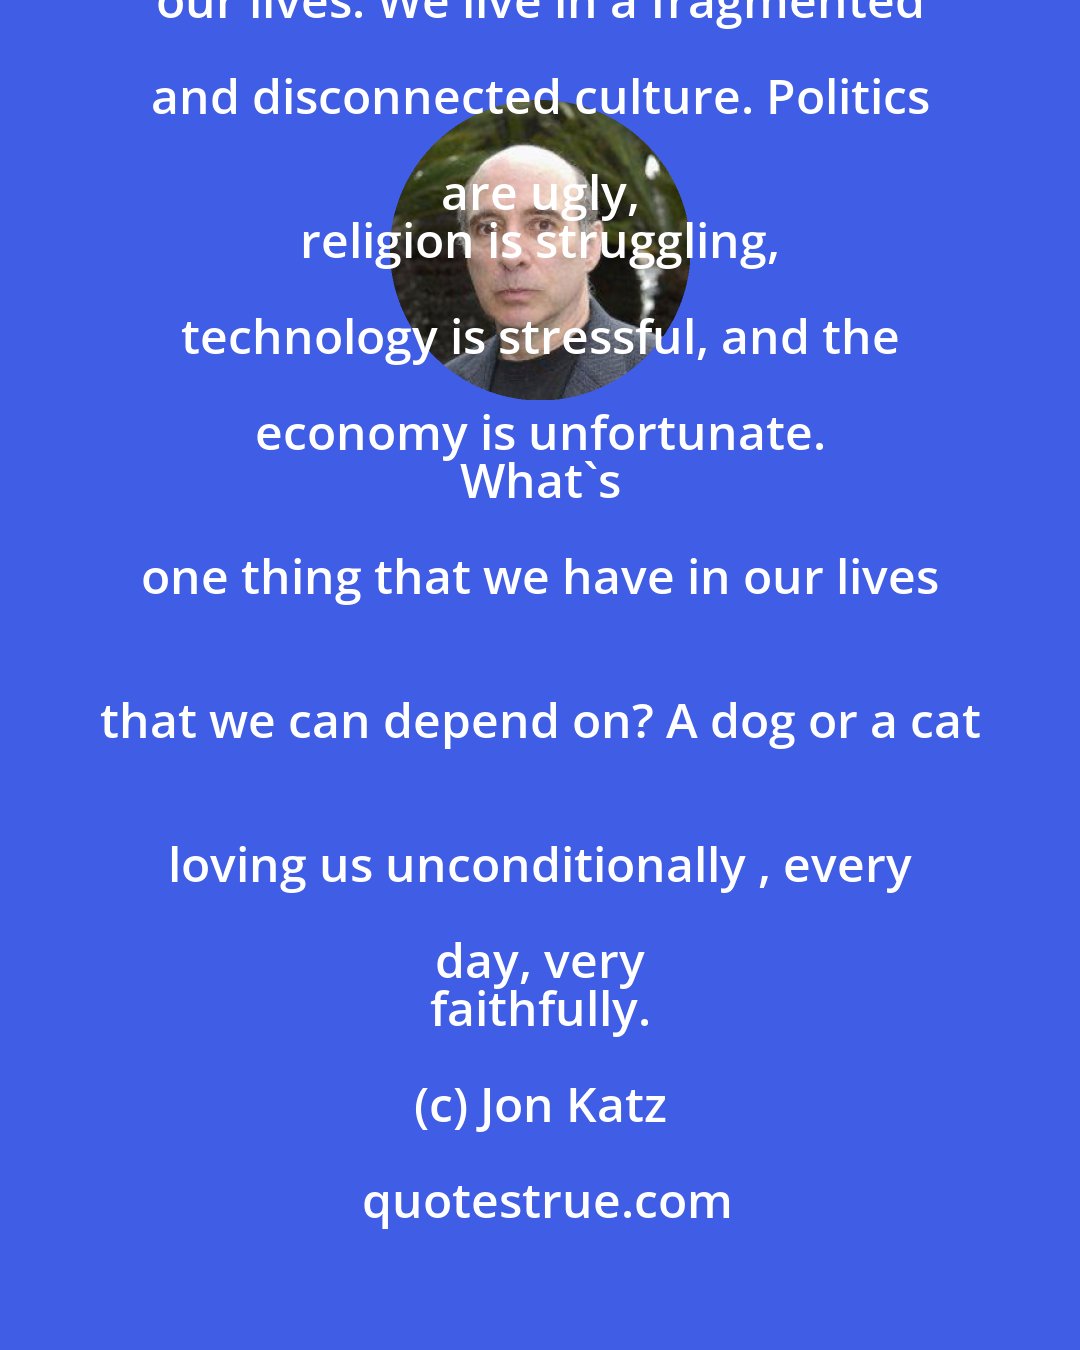 Jon Katz: Animals have come to mean so much in 
 our lives. We live in a fragmented and disconnected culture. Politics are ugly, 
 religion is struggling, technology is stressful, and the economy is unfortunate. 
 What's one thing that we have in our lives 
 that we can depend on? A dog or a cat 
 loving us unconditionally , every day, very 
 faithfully.